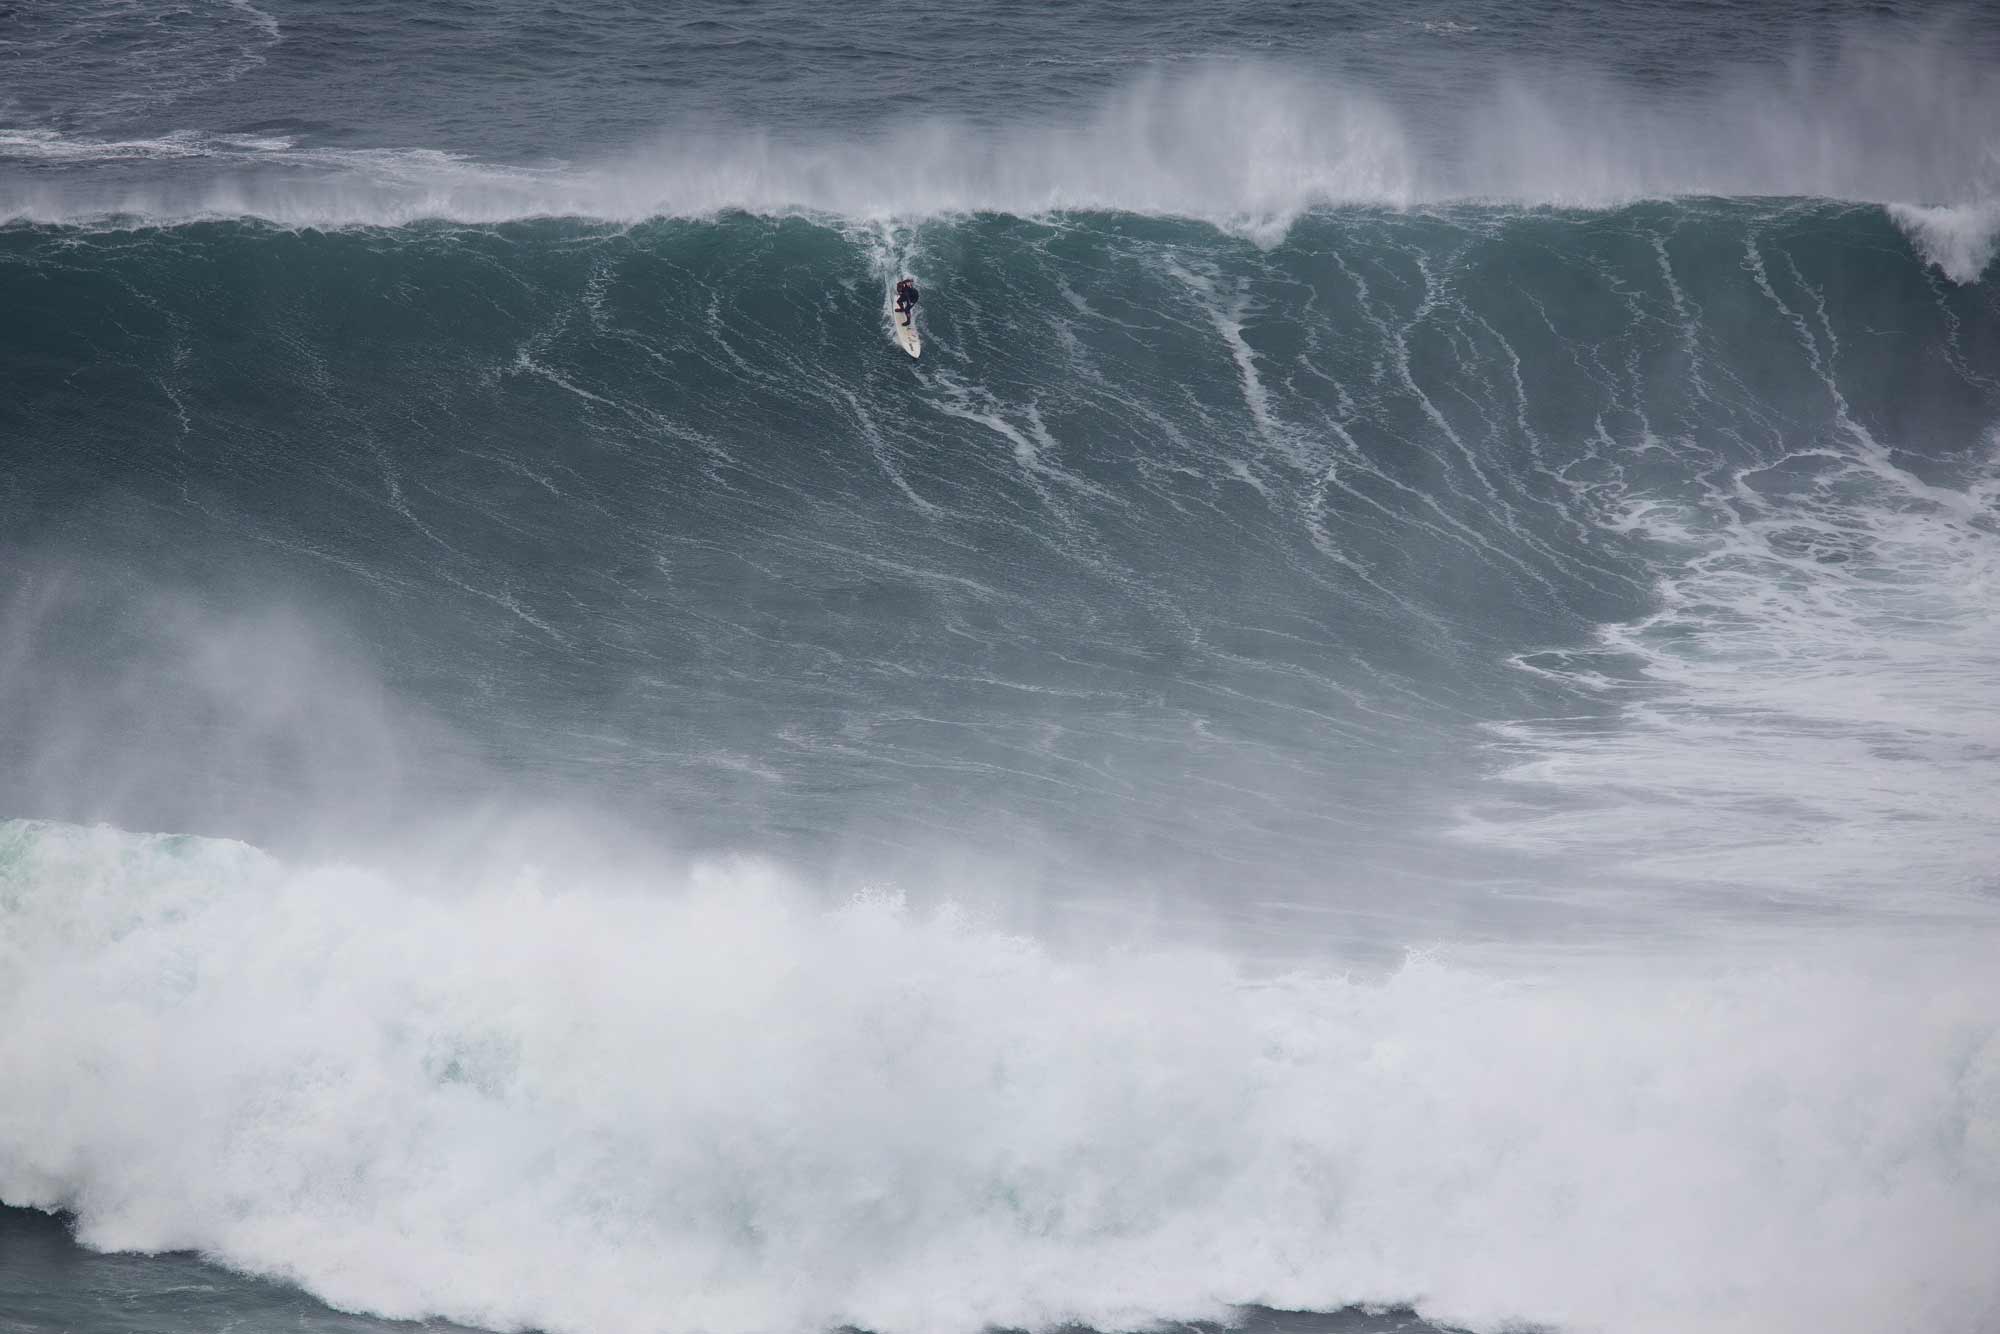 British big wave surfer Andrew Cotton slays a monster at Nazaré - Photo: Hugo Silva / Red bull Content Pool